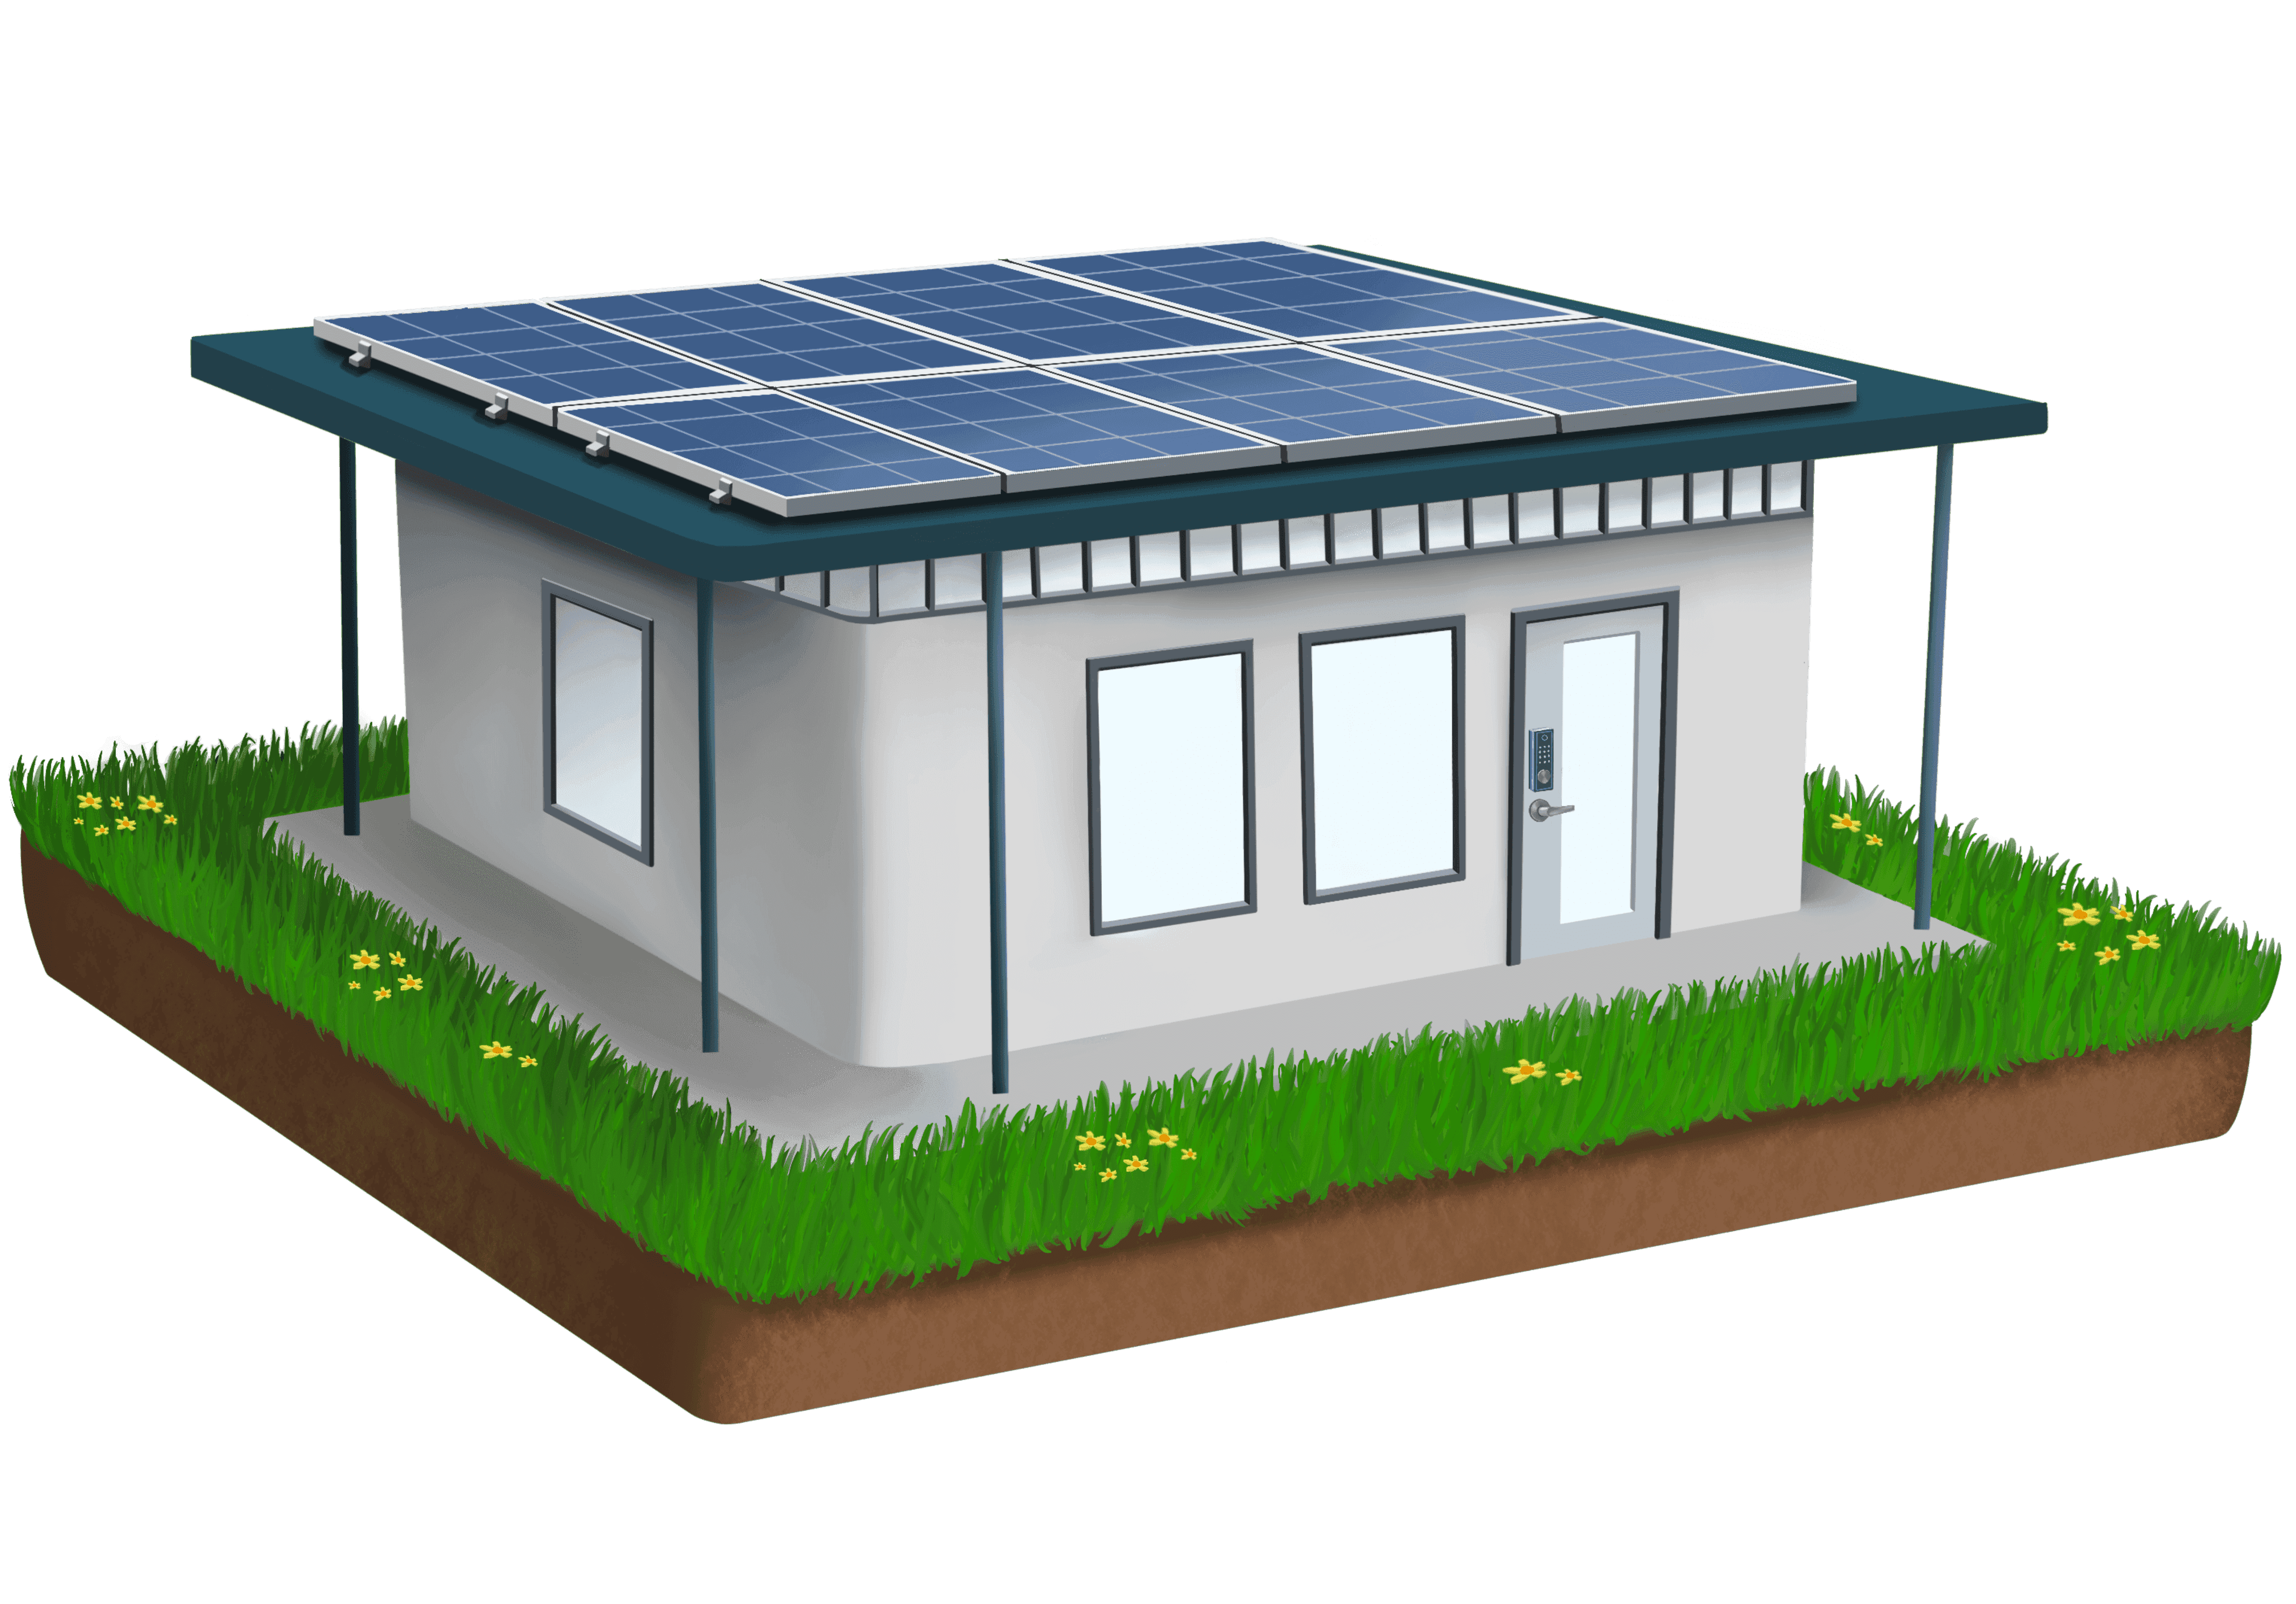 rendering of a 3D-printed plöt house with solar panels on the roof.